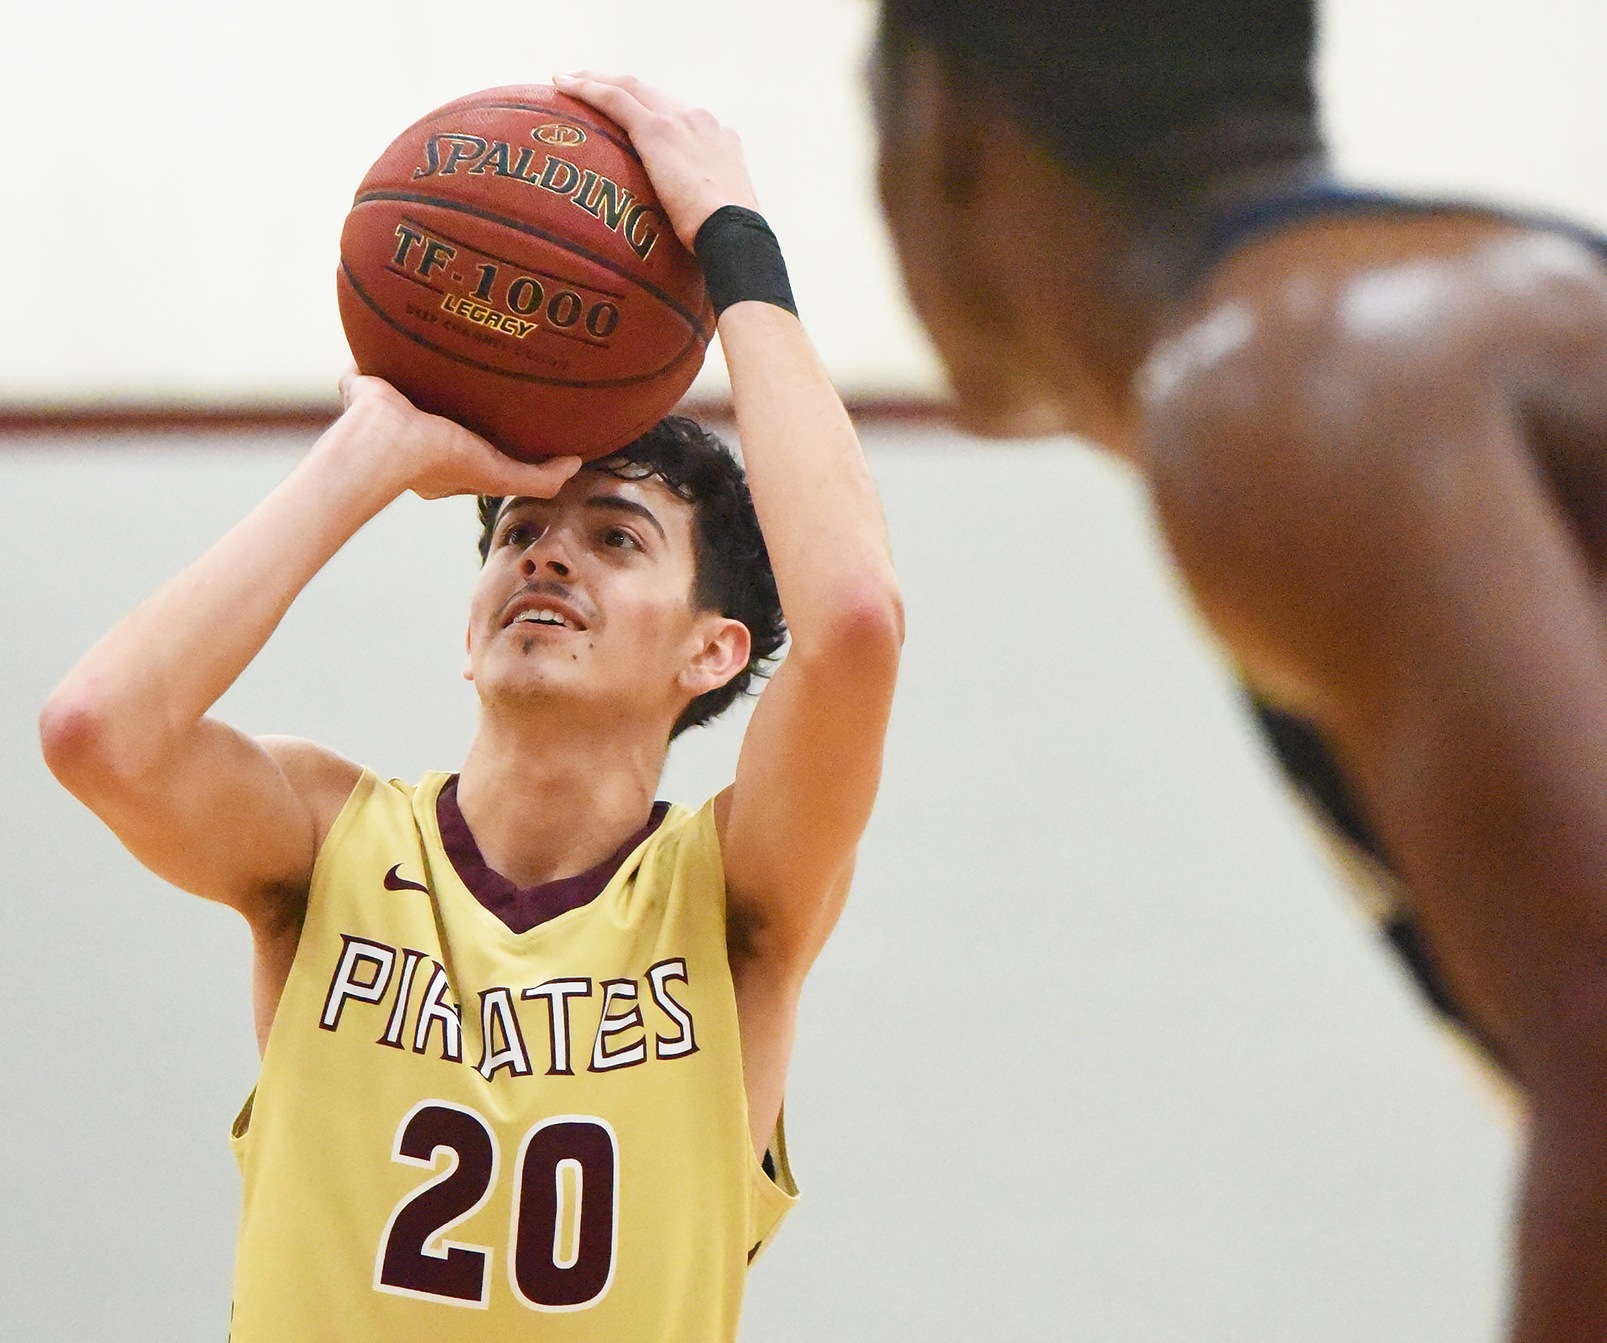 Lucas DeLeon scored 10 points Wednesday night against Lee College.